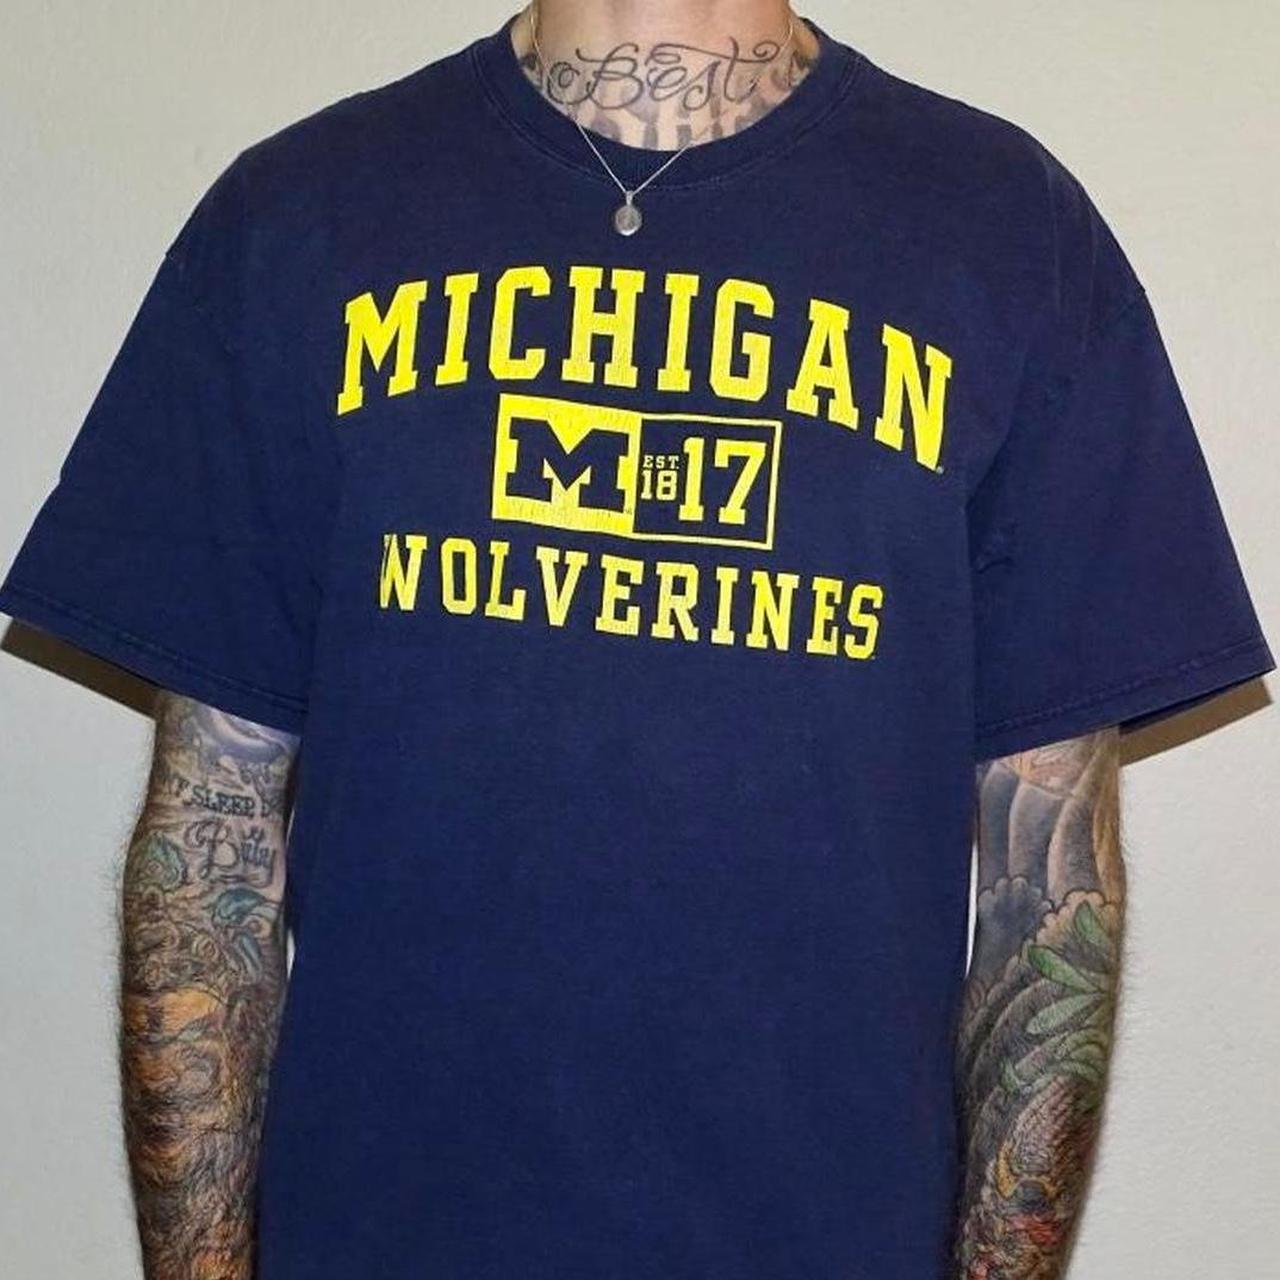 American Vintage Men's Navy and Yellow T-shirt